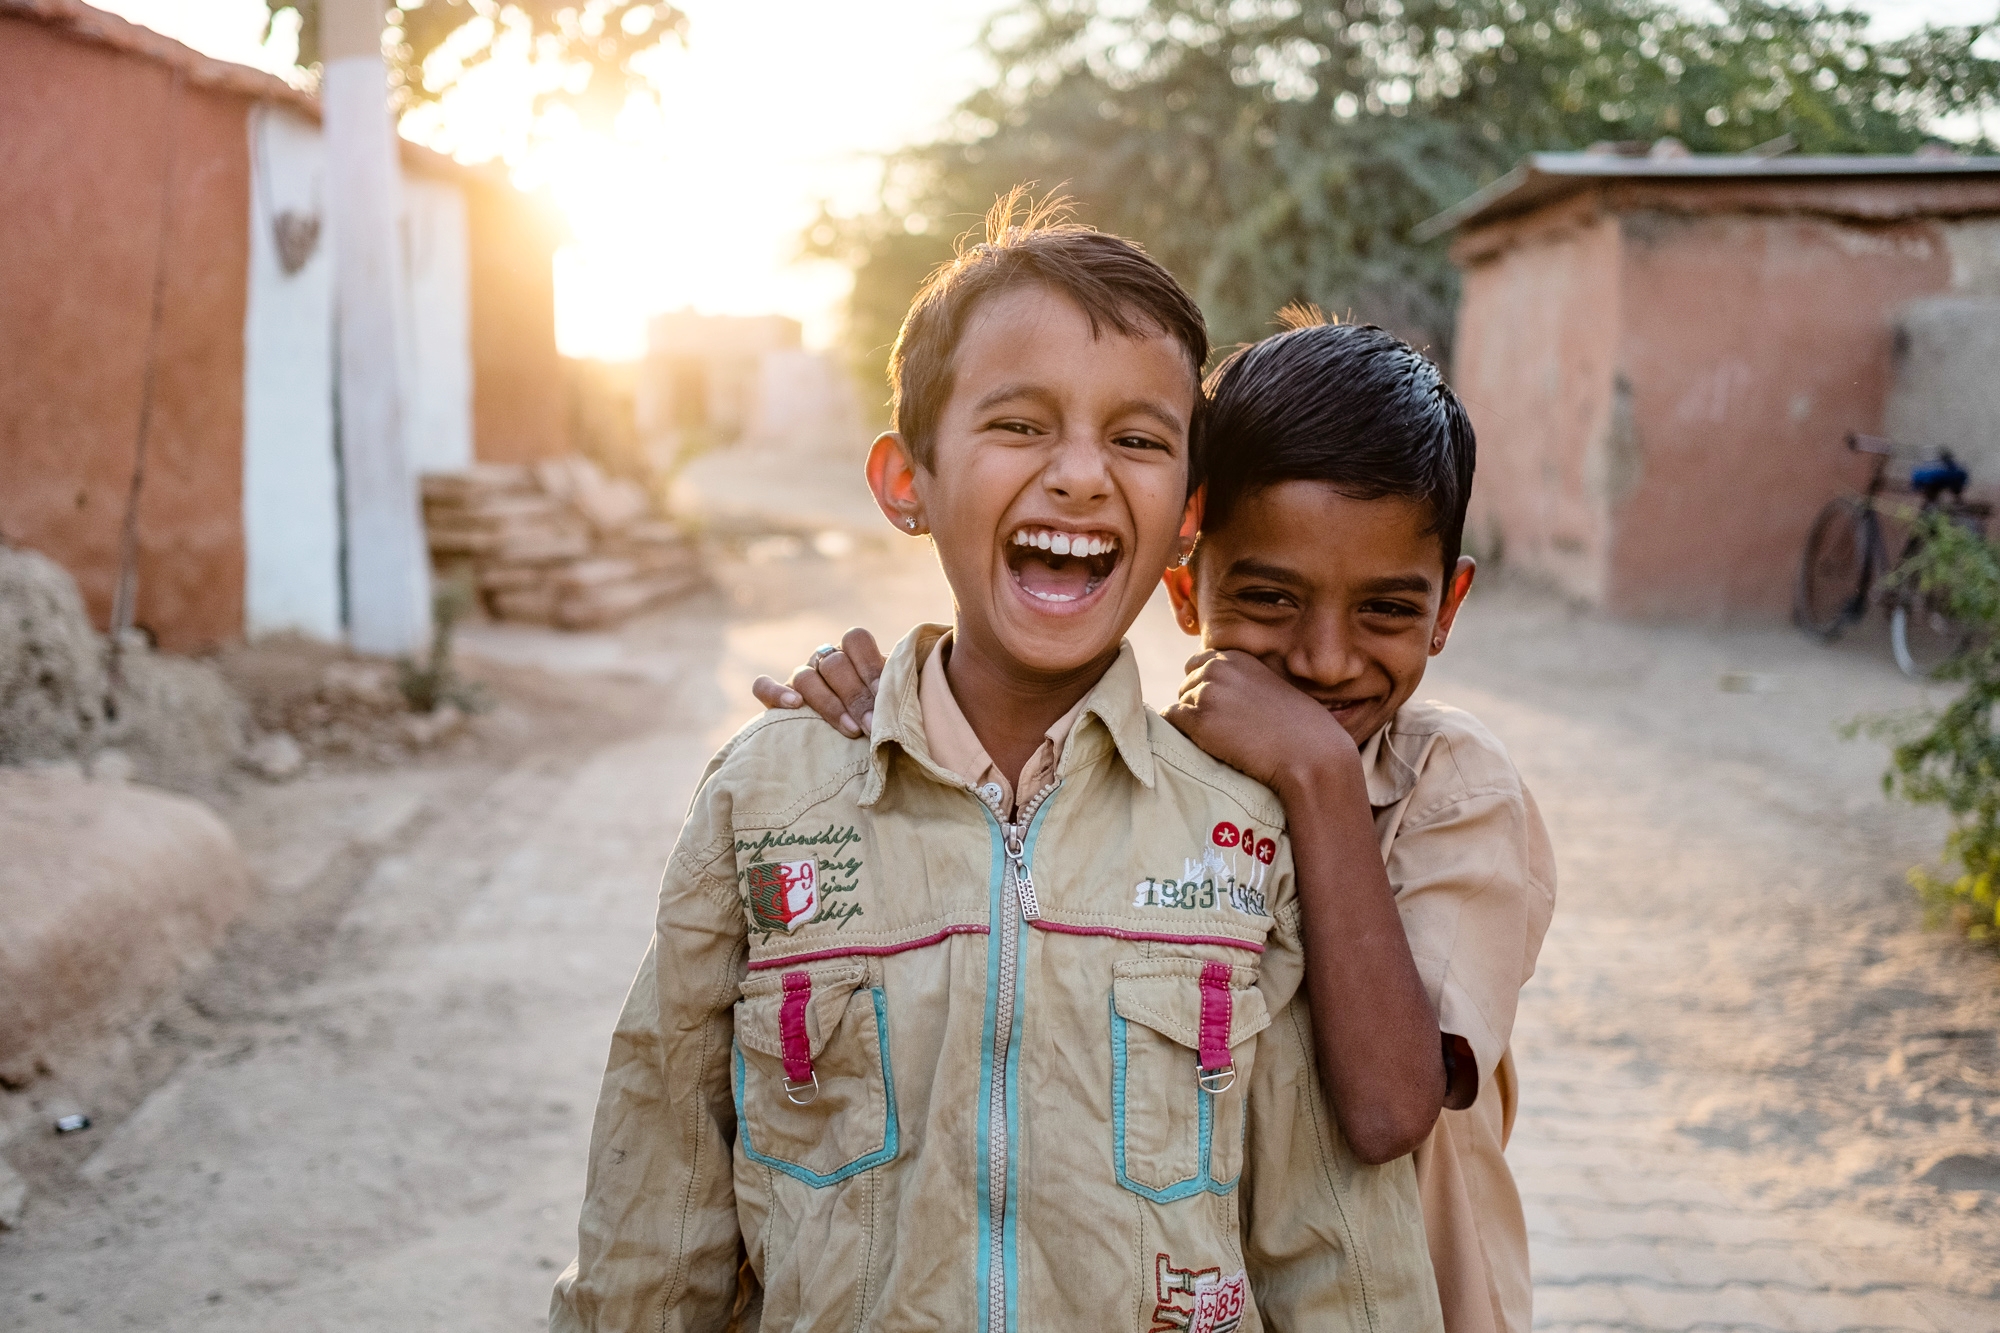 "Happy boys" No matter what peoples circumstances are, they can be happy. India, one of my favorite places.